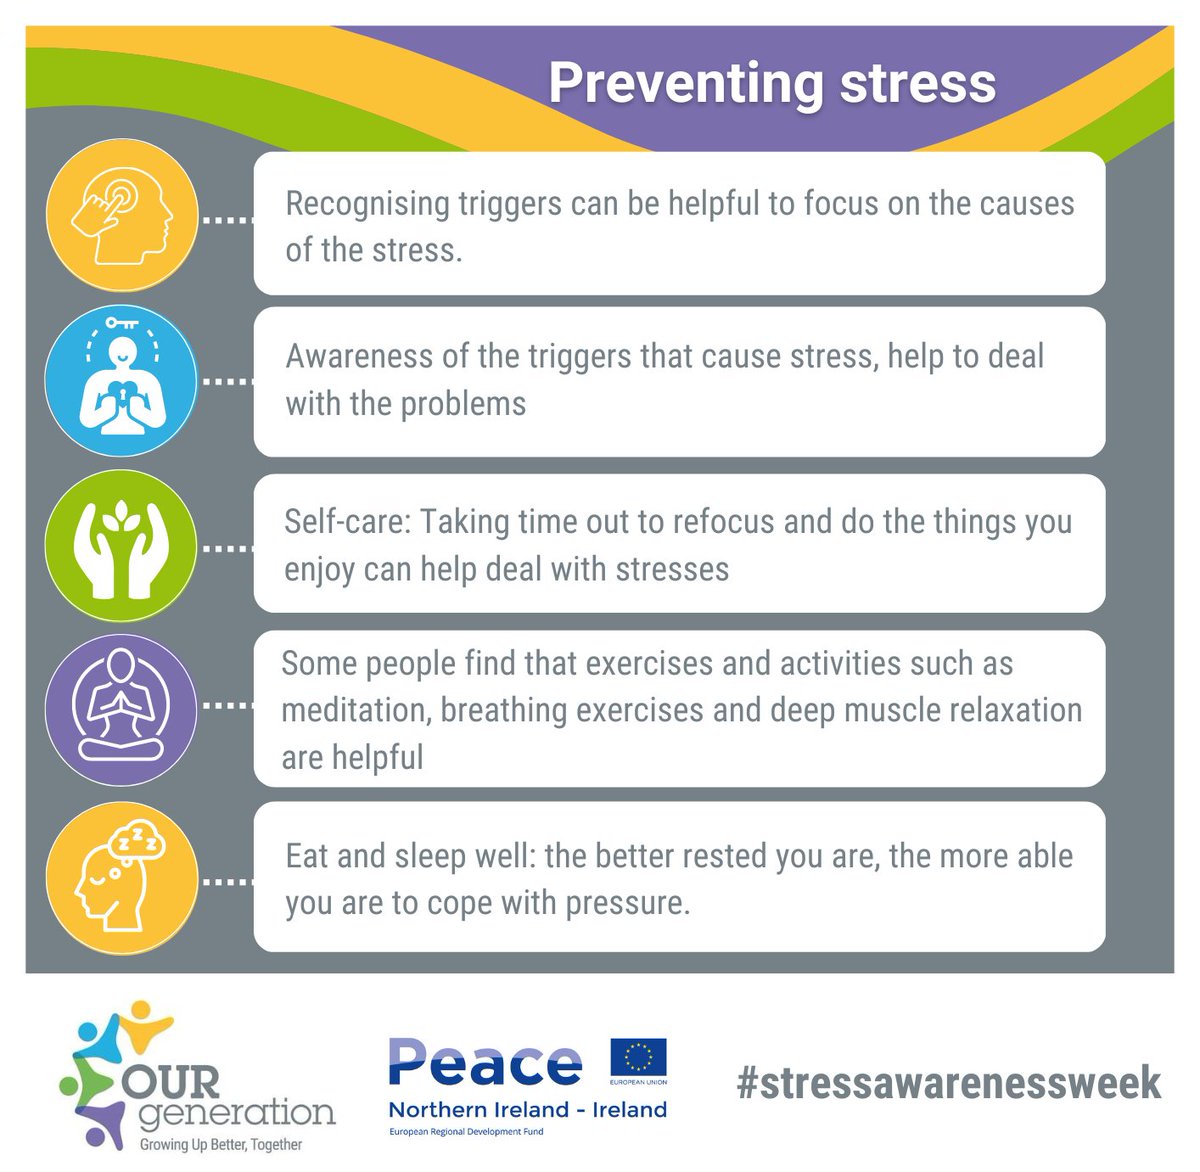 Your body's stress response can be triggered by day-to-day negative thoughts & worries about work, health, exams, finances, politics and relationships…

Today we're highlighting simple ways we can help to prevent stress. 👇

 #stressawarenessweek #WellnessWednesday @ISMA_UK